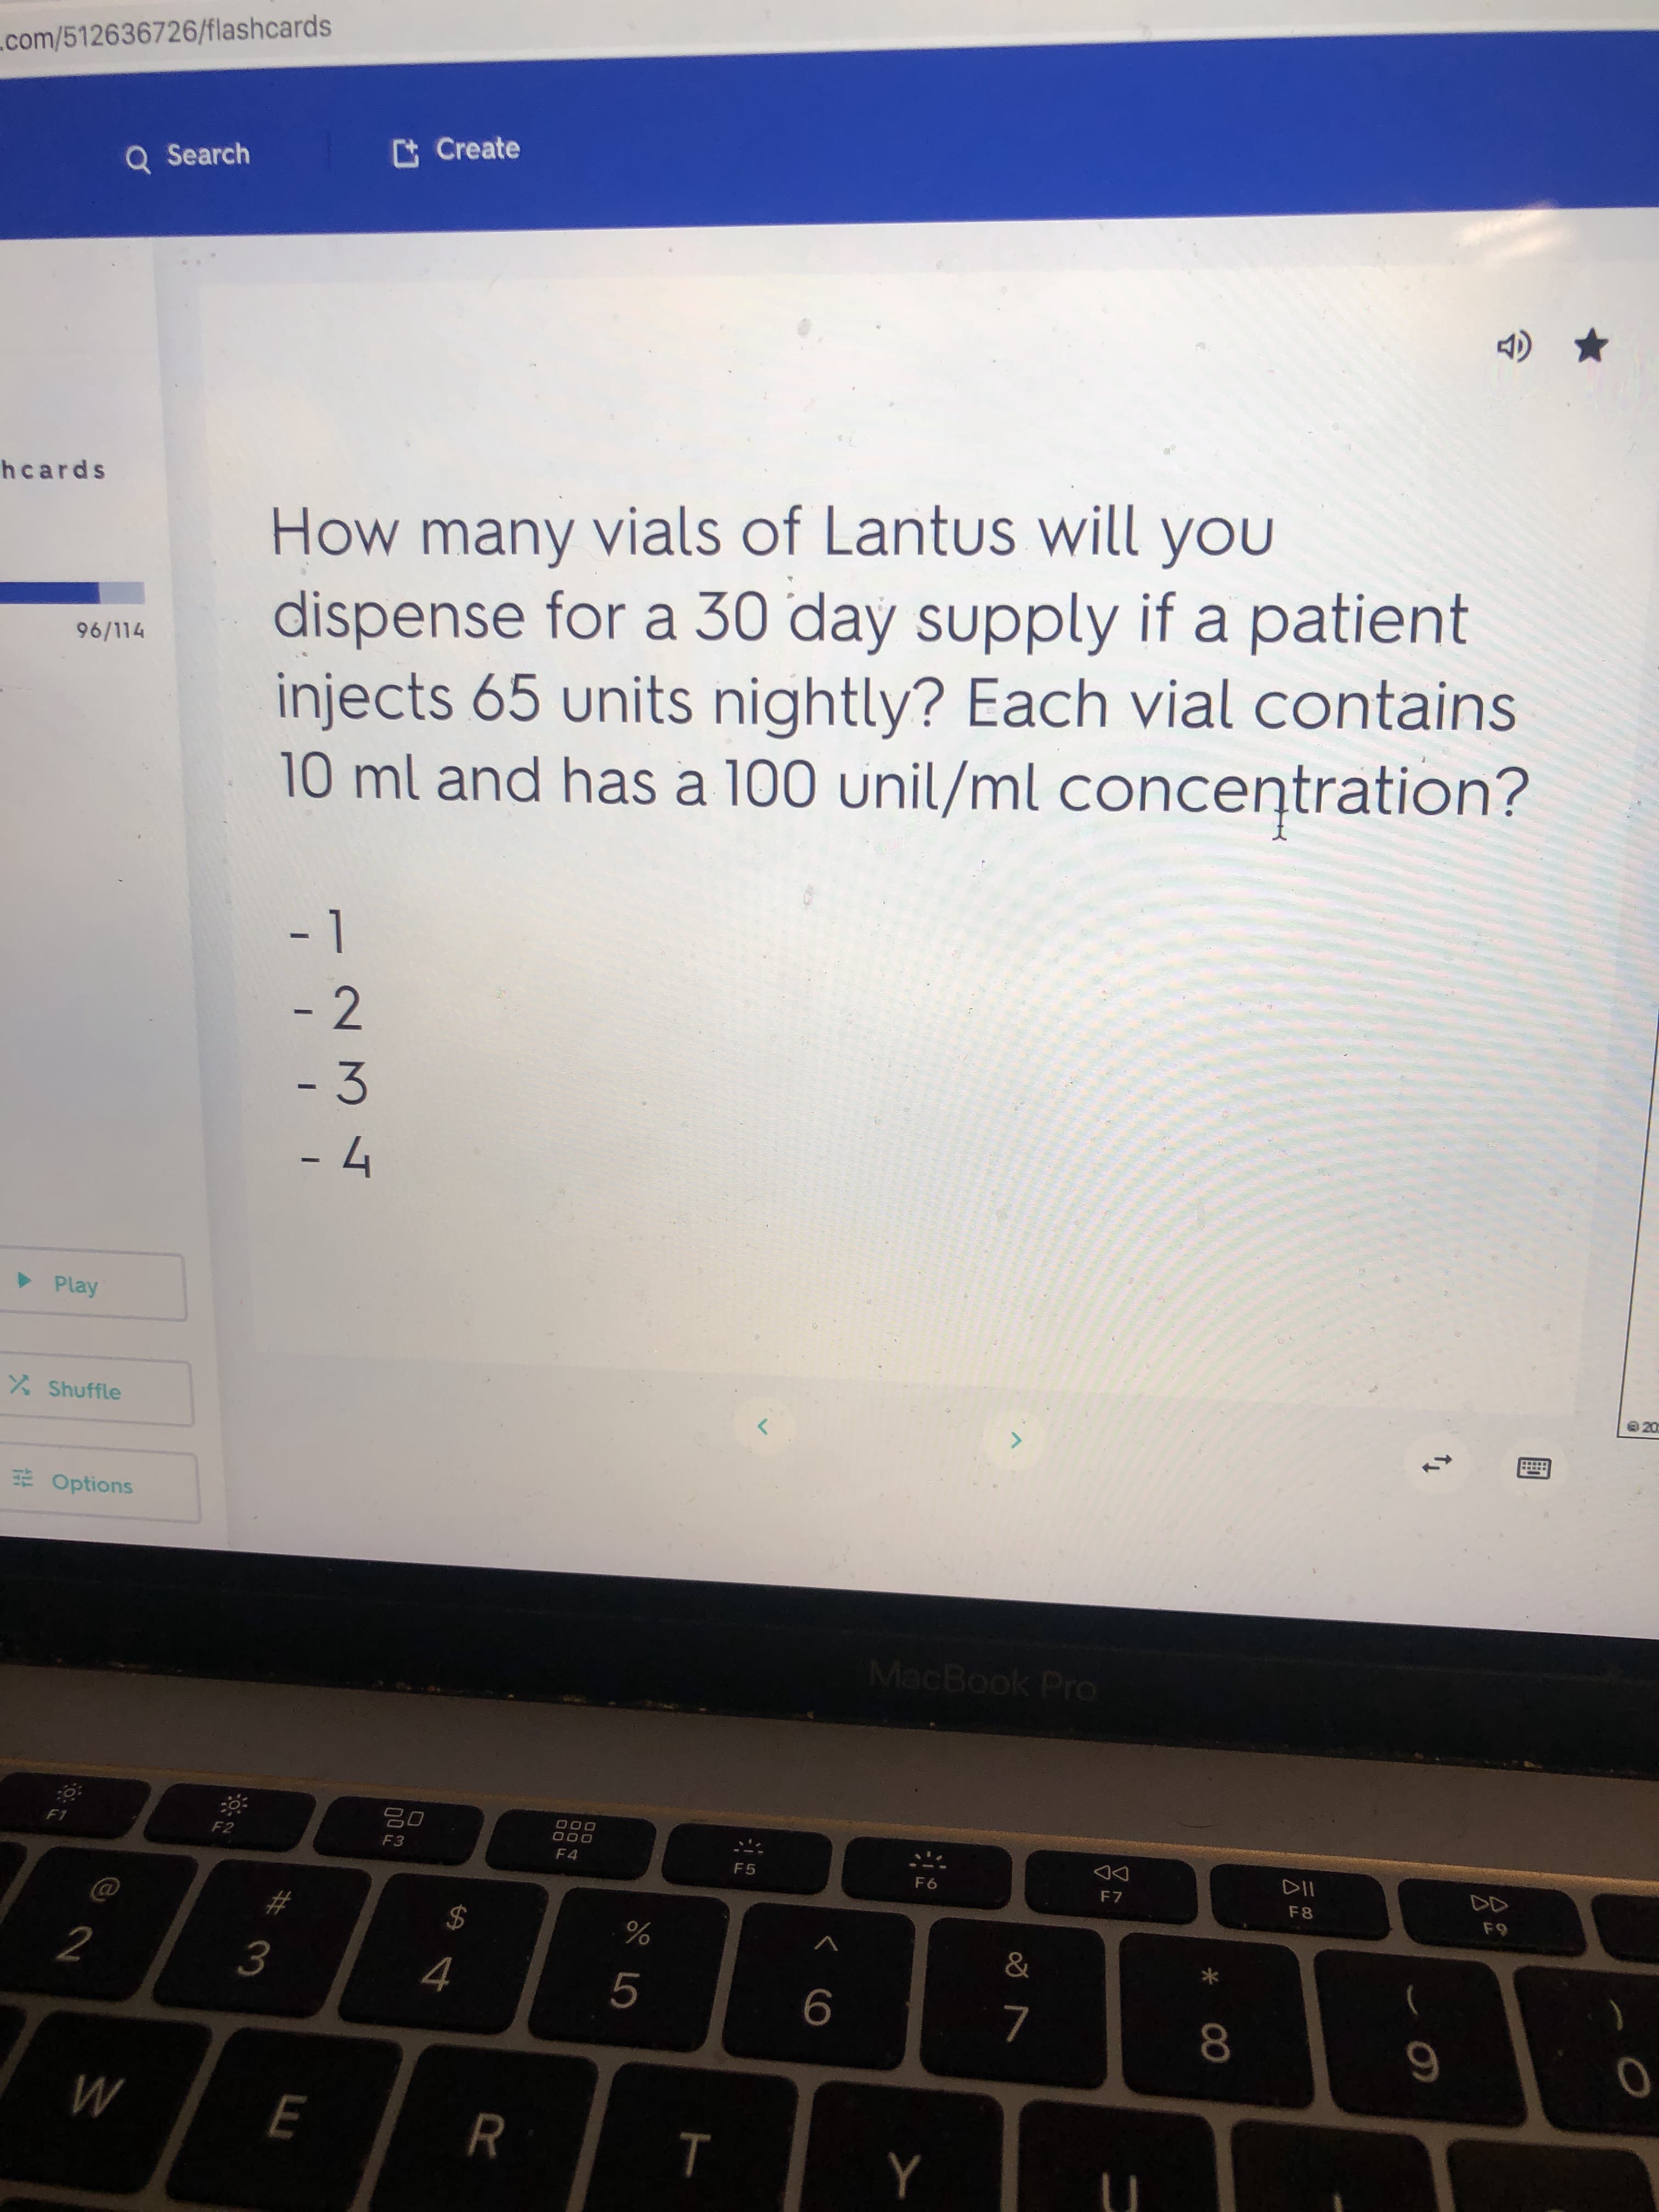 How many vials of Lantus will you
dispense for a 30 day supply if a patient
injects 65 units nightly? Each vial contains
10 ml and has a 100 unil/ml concentration?
